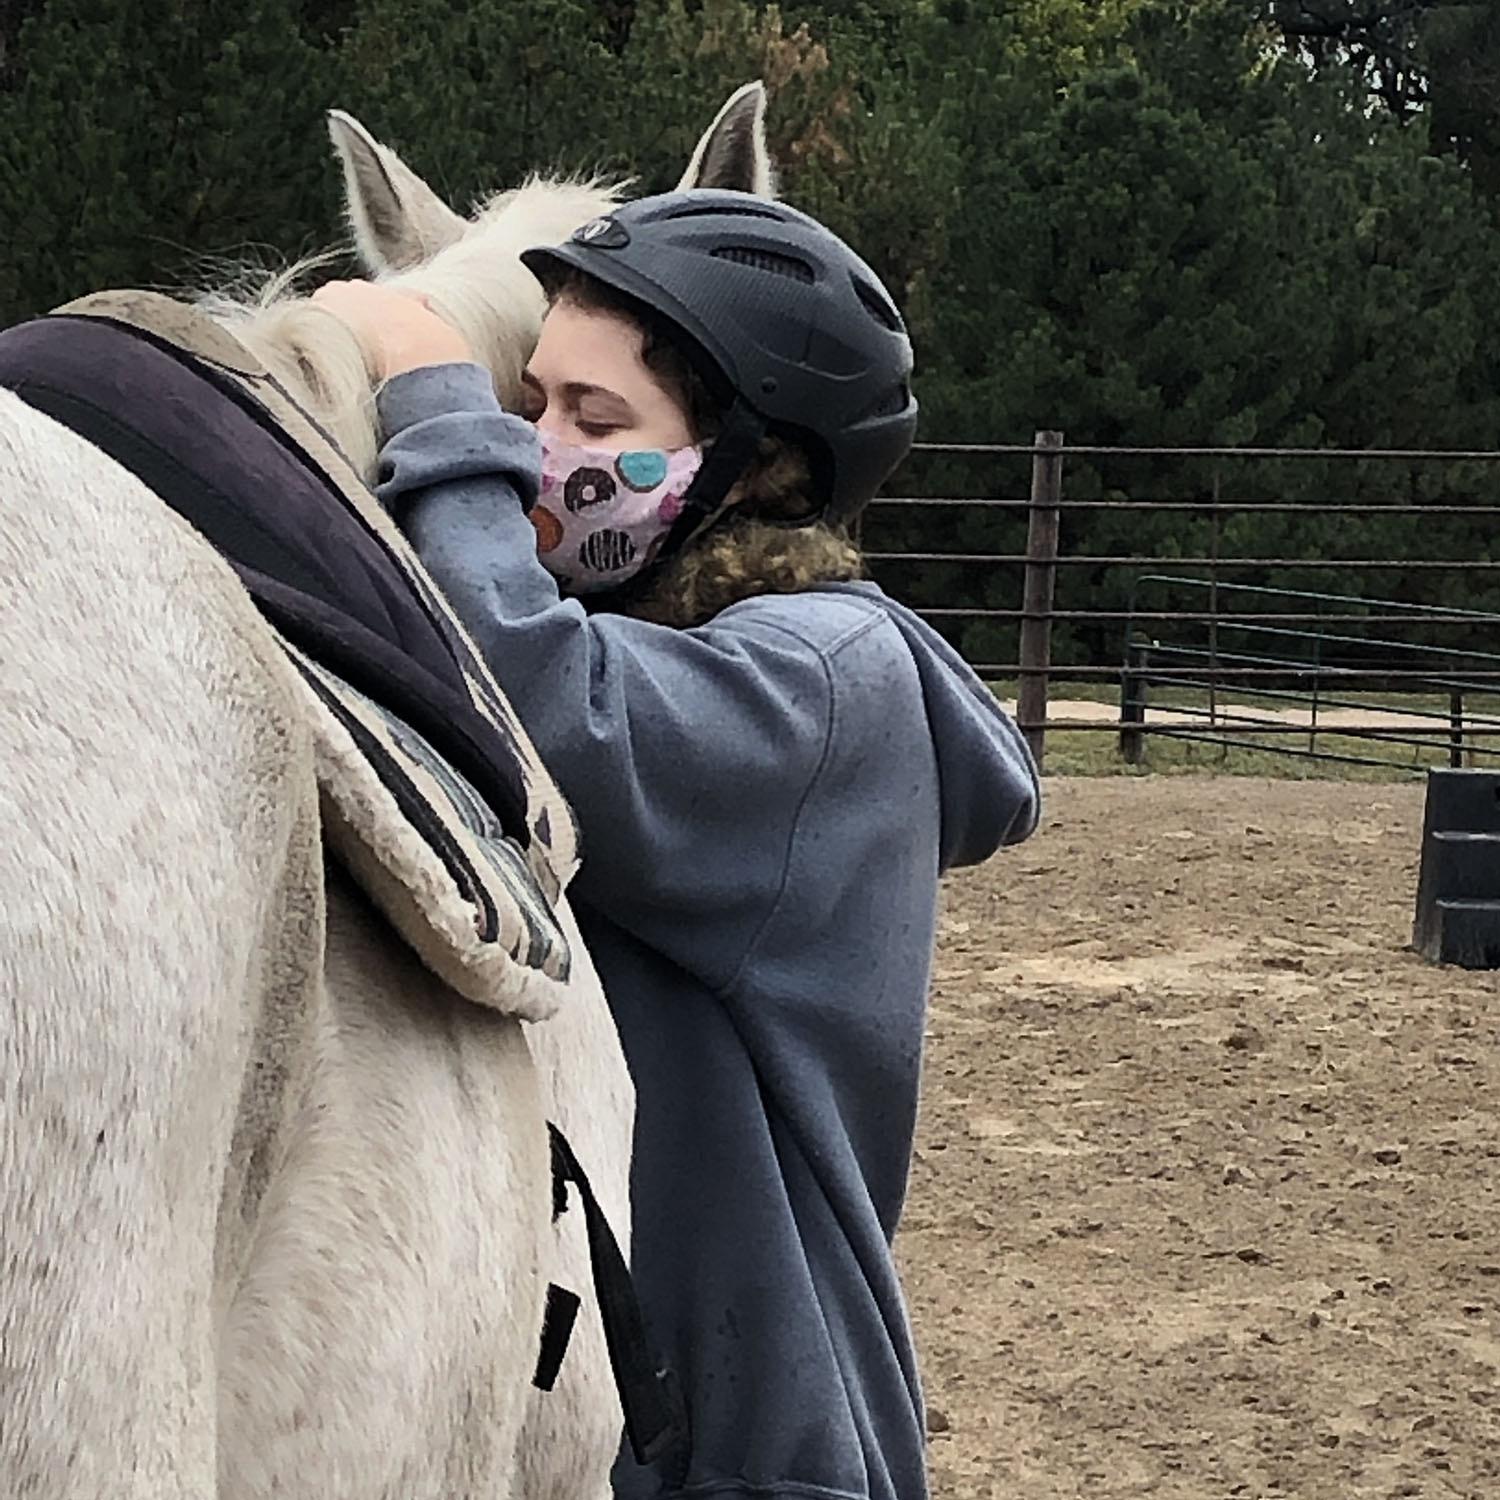 a teen with a facemask hugs a white horse in an outdoor fenced area